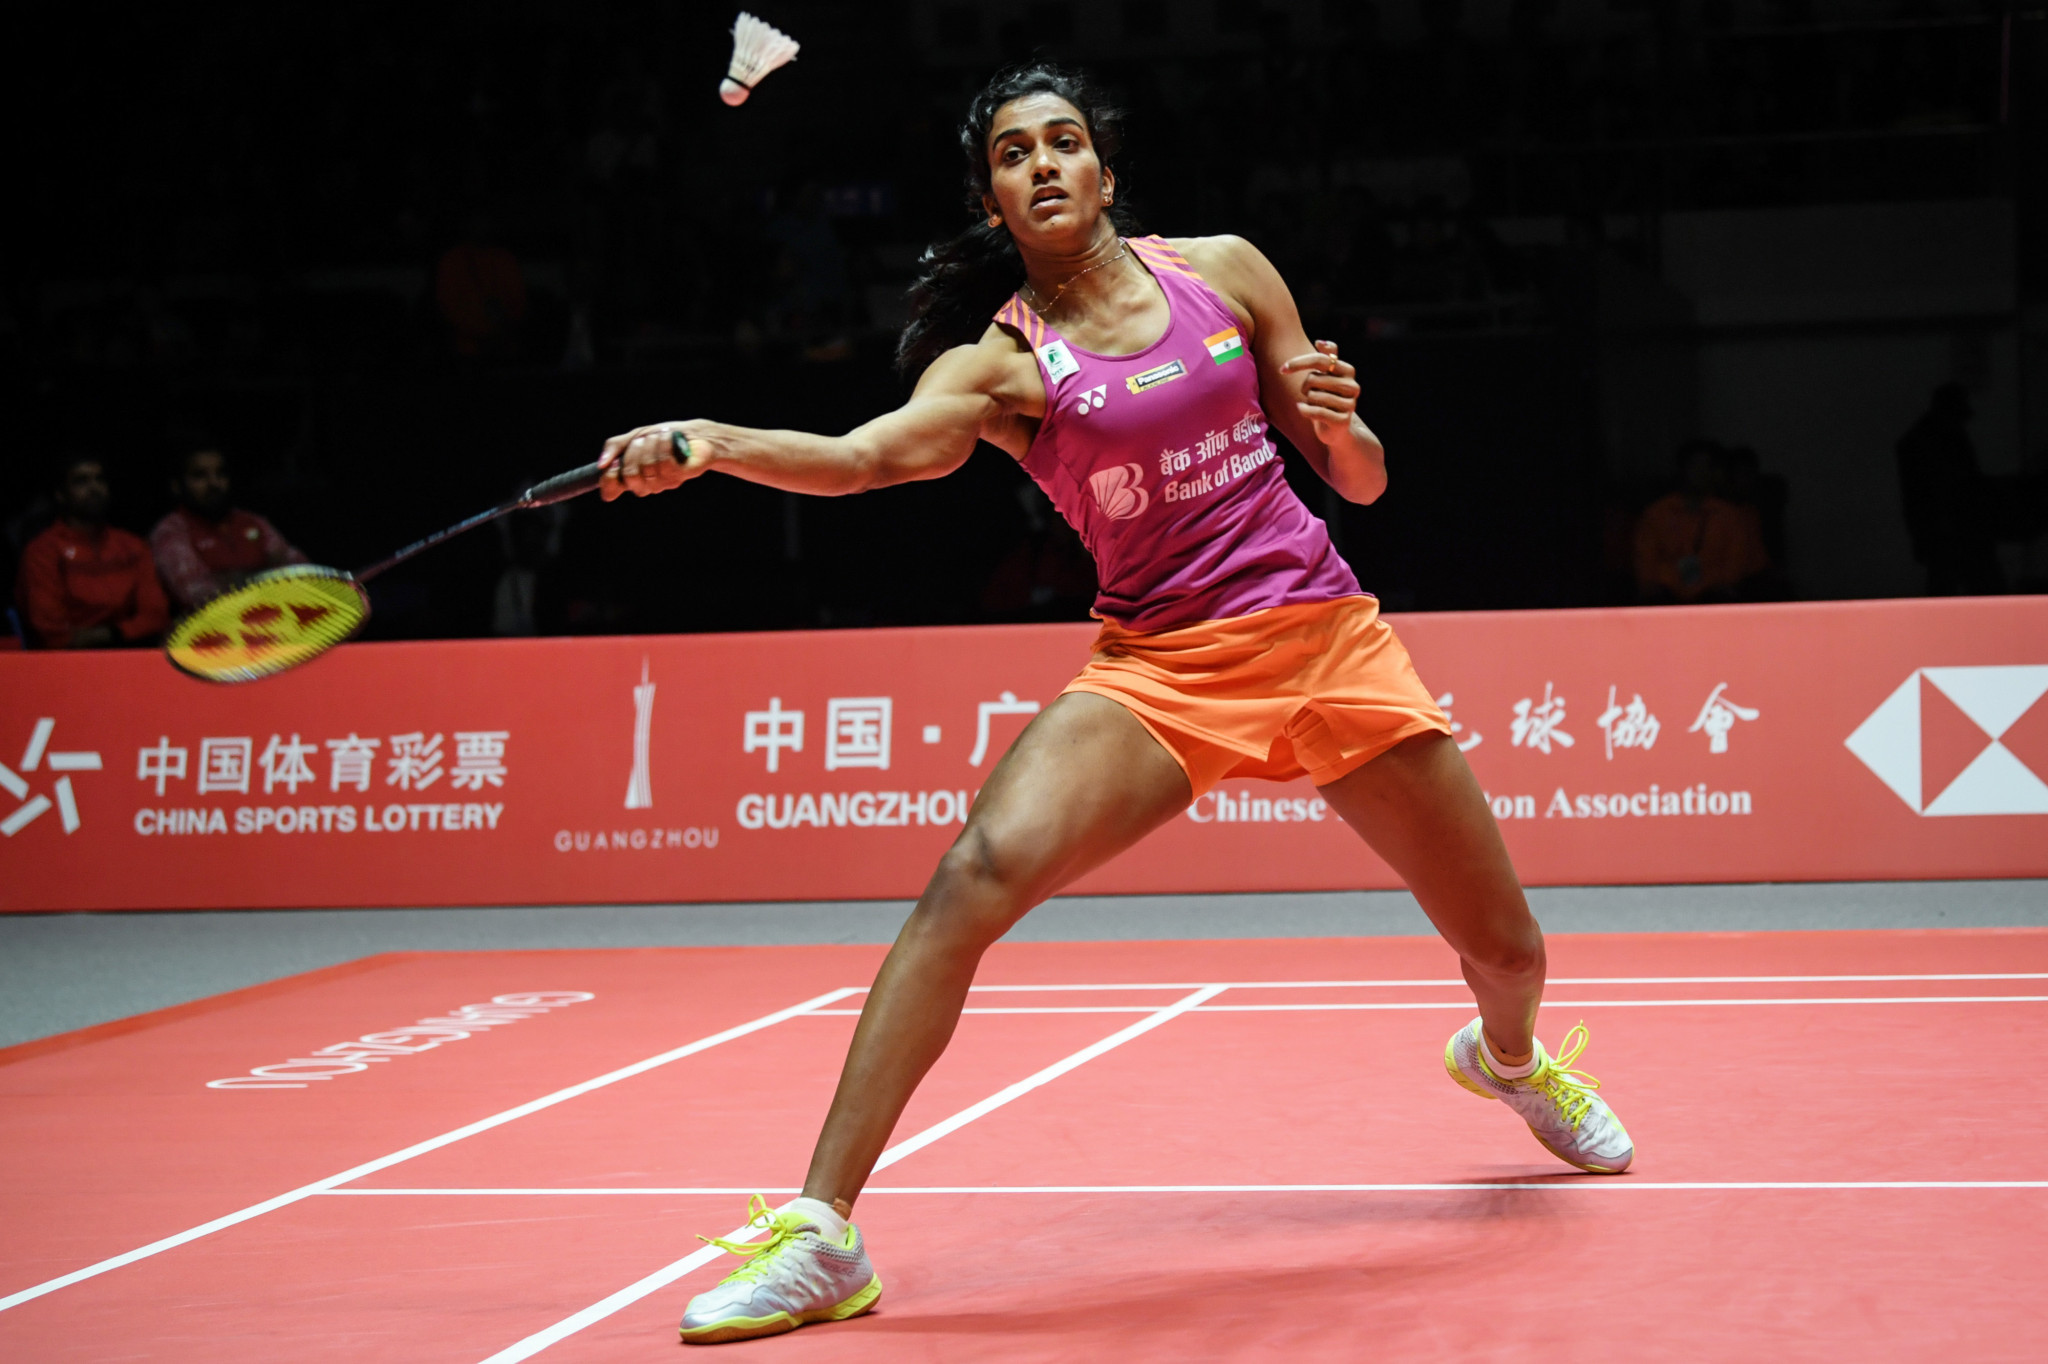 India's Sindu Pusarla, now the top seed in the women's competition, begins her India Open campaign tomorrow ©Getty Images